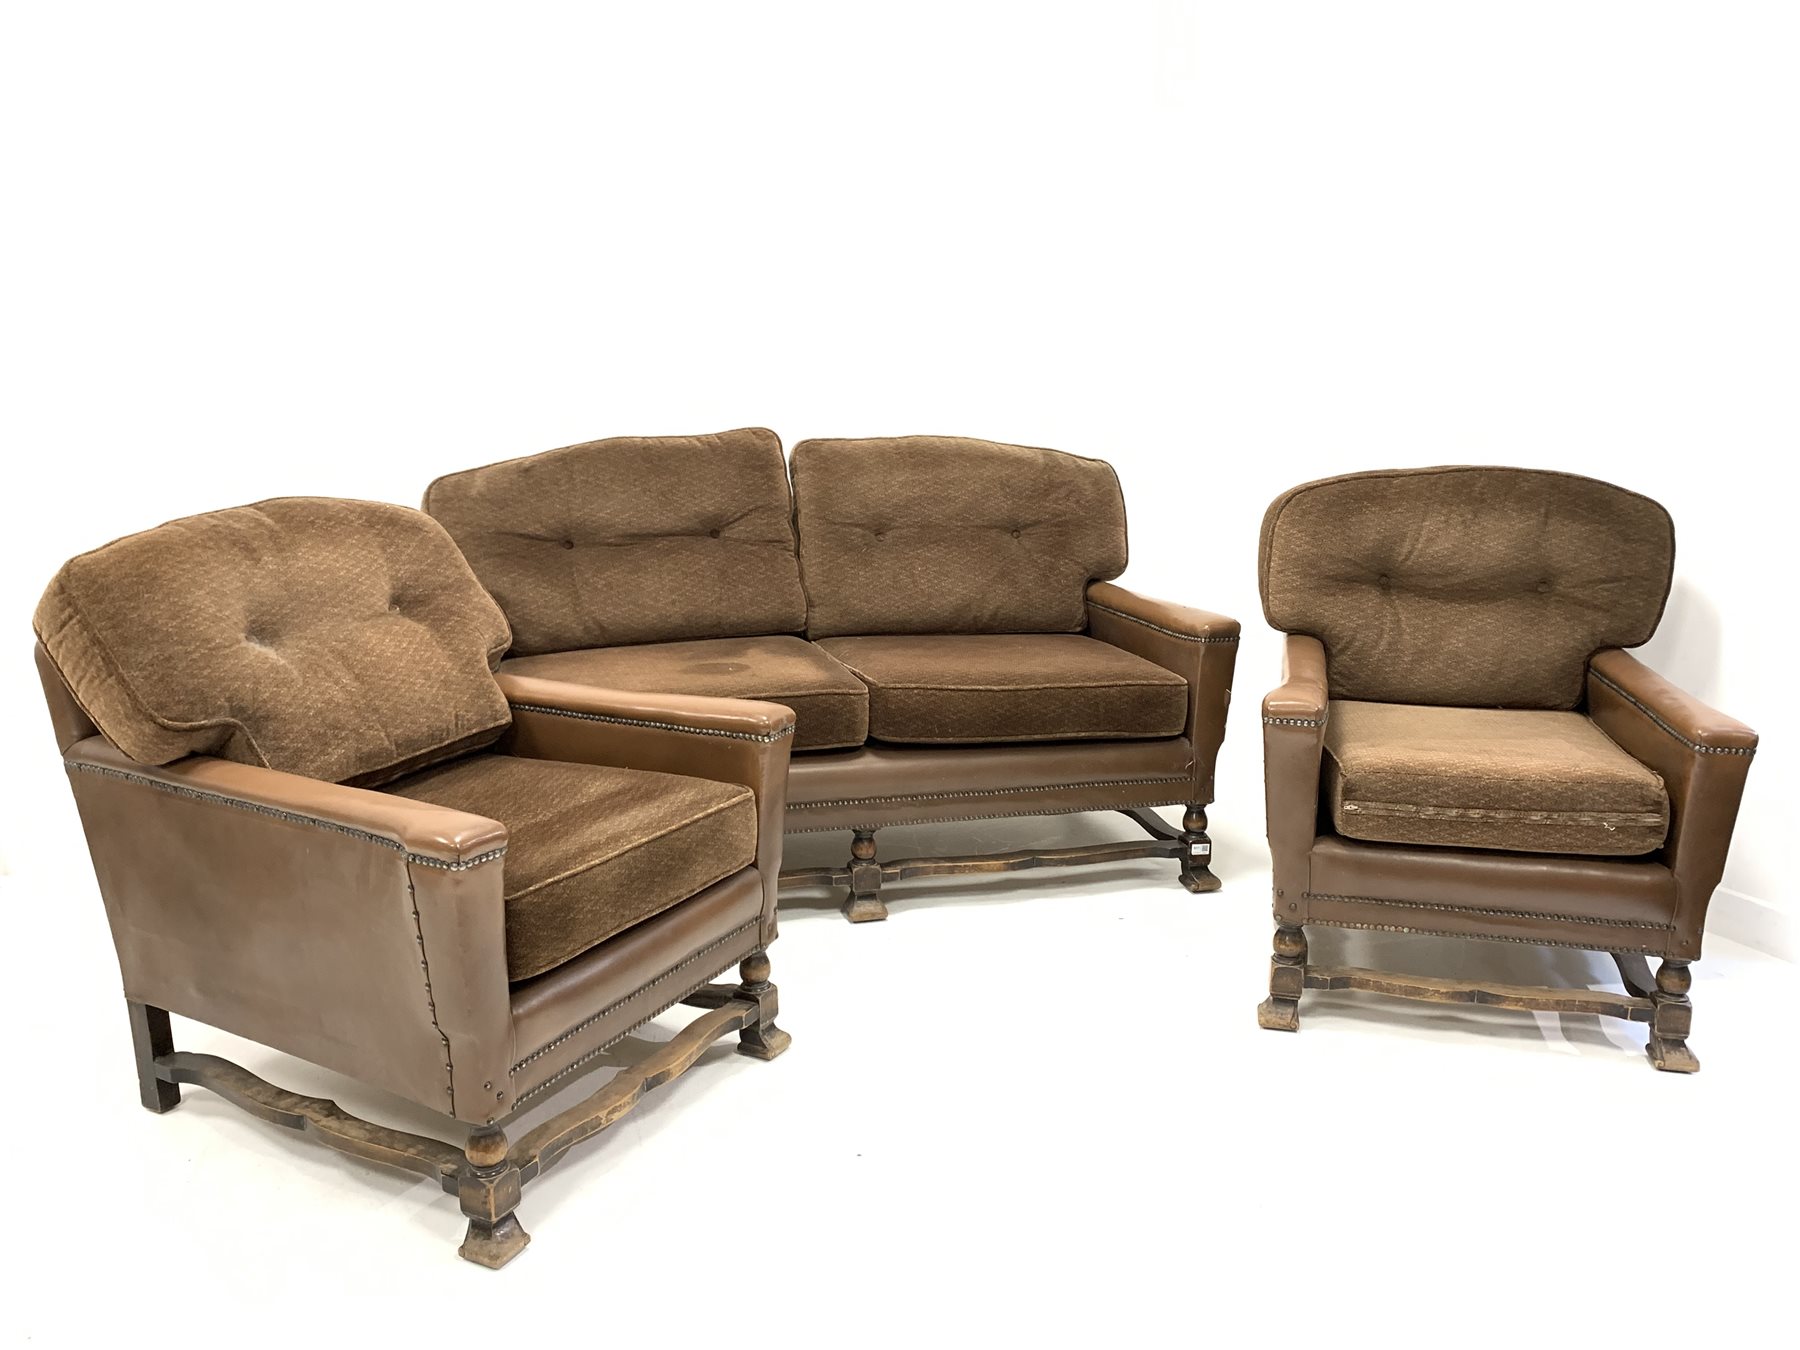 Early 20th century three piece suite, comprising a two seat sofa upholstered in studded leather with